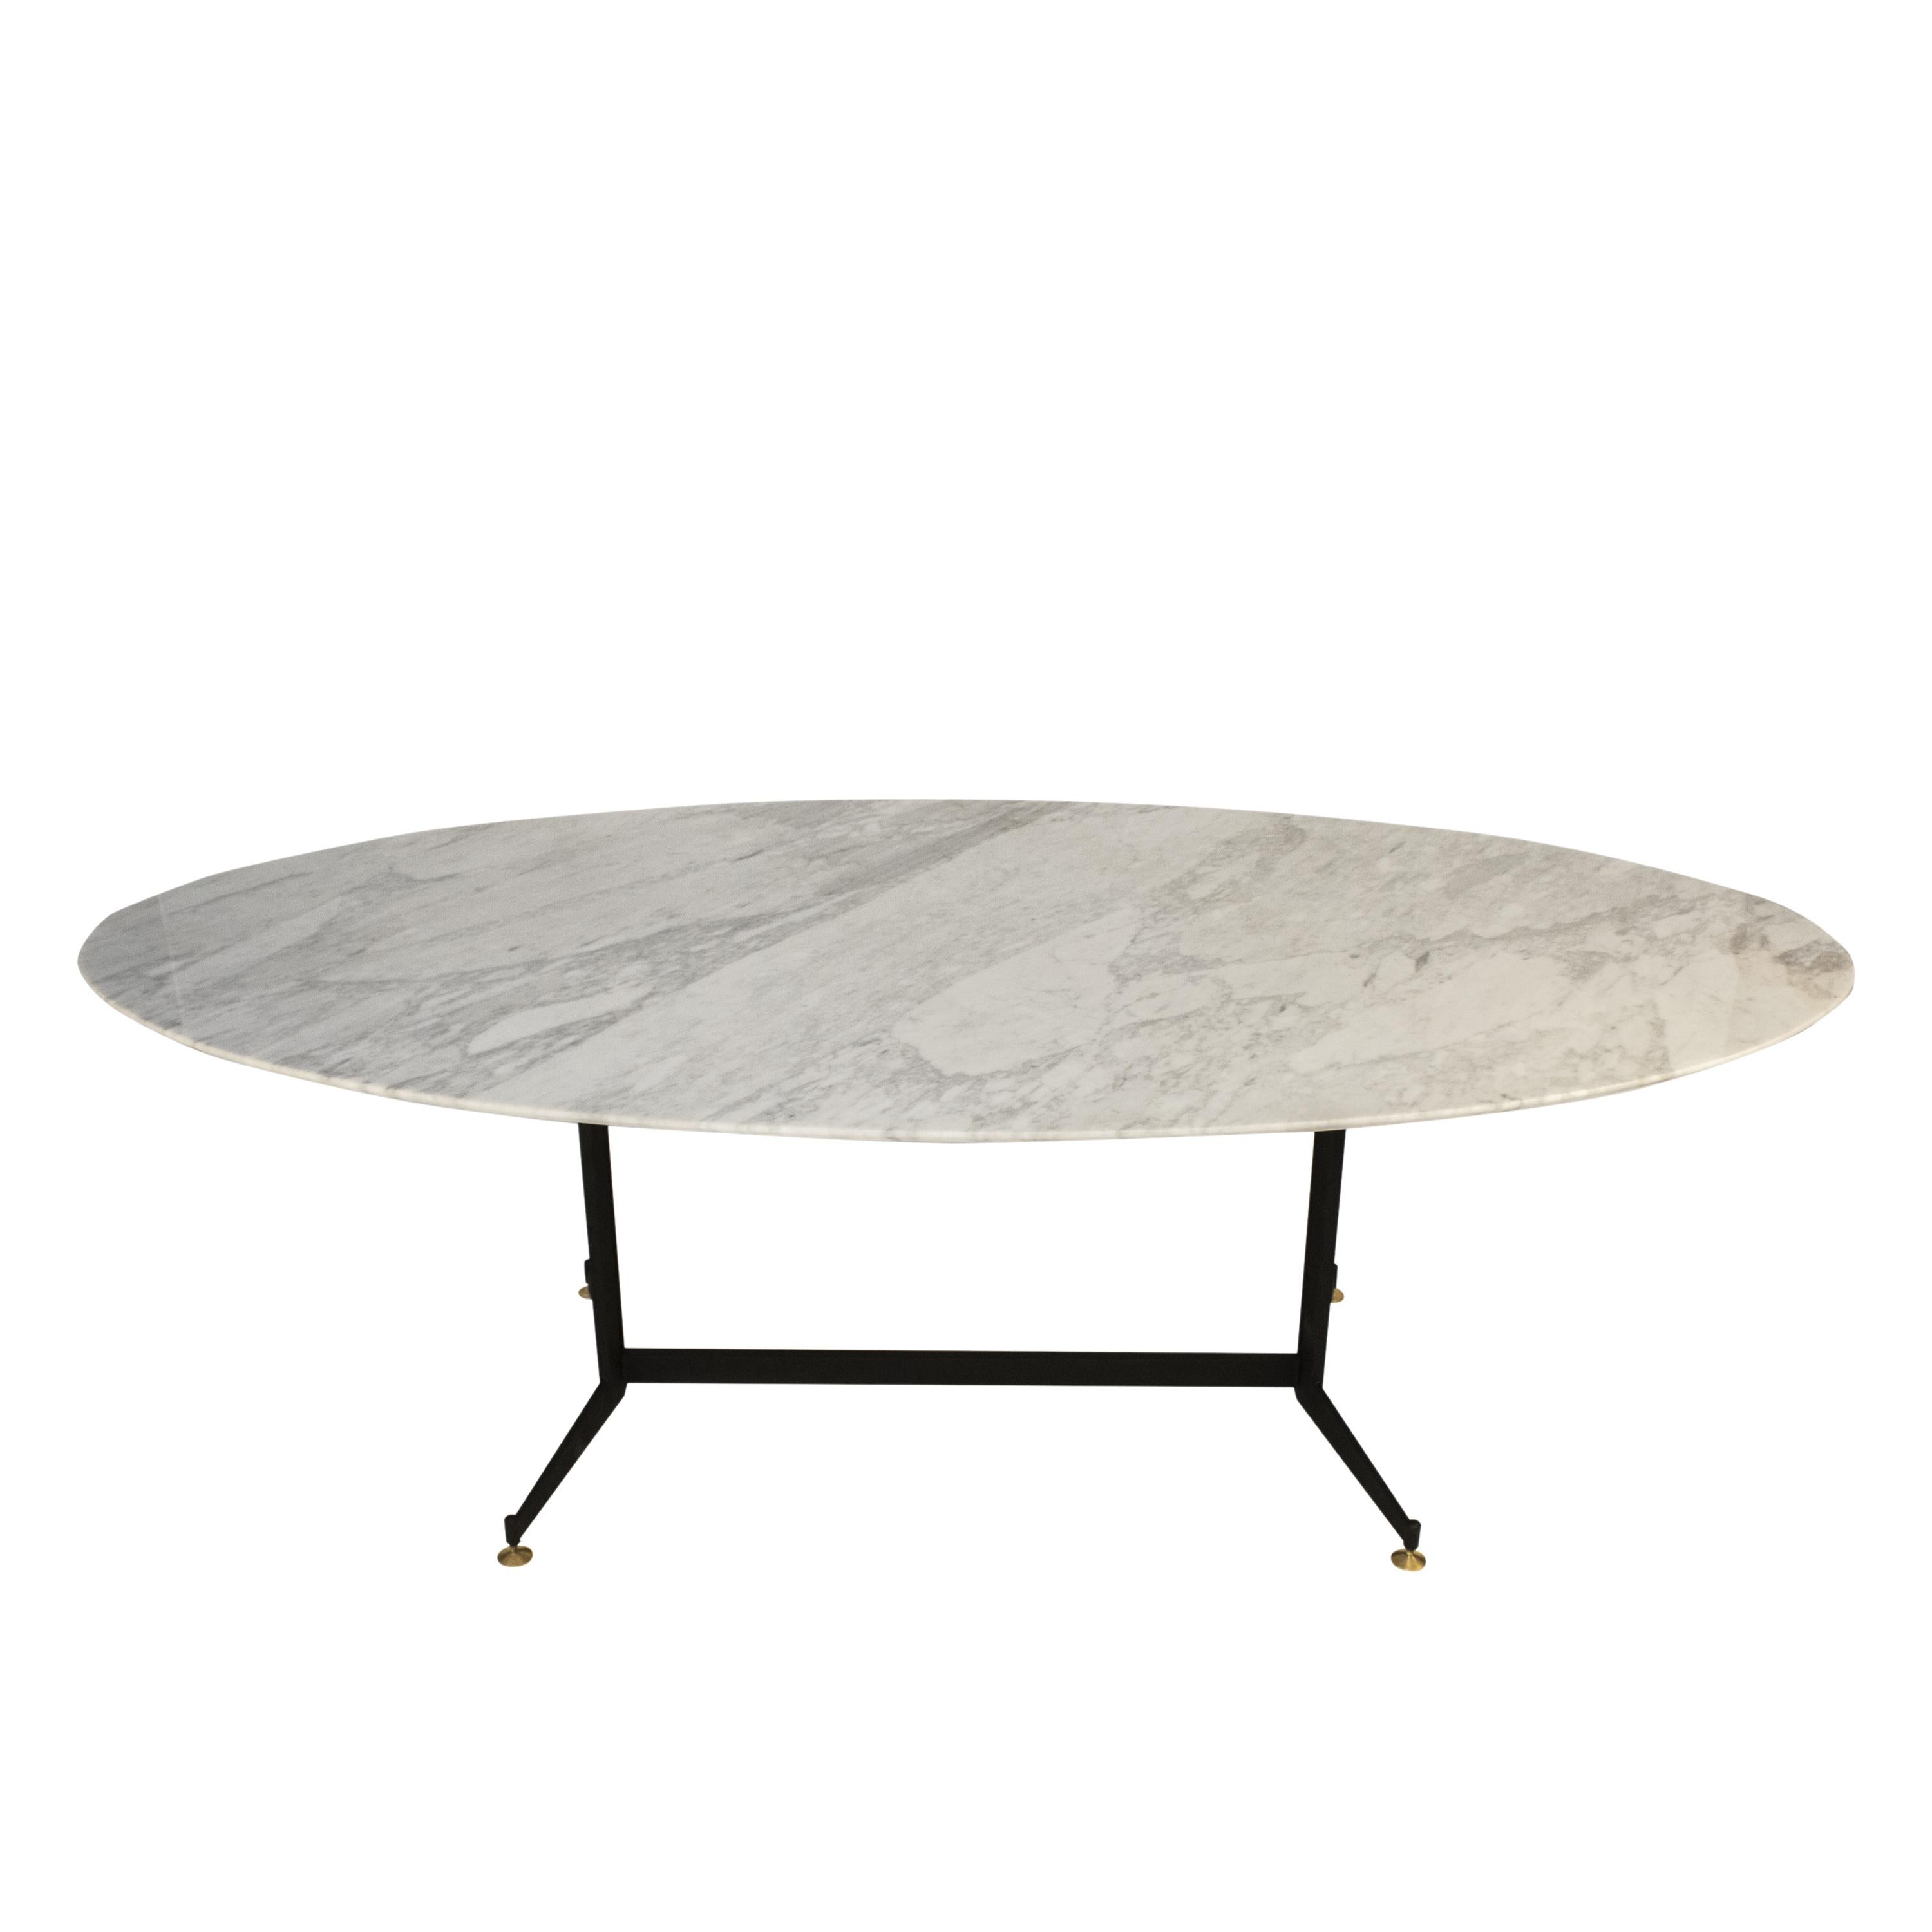 Italian mid-century modern oval dining table from the 1950's. 

The table is made up of a metallic foot with four legs lacquered in black and leveling pads finished in aged brass. The 2 cm thick oval Carrara marble top with a flute peak edge finish